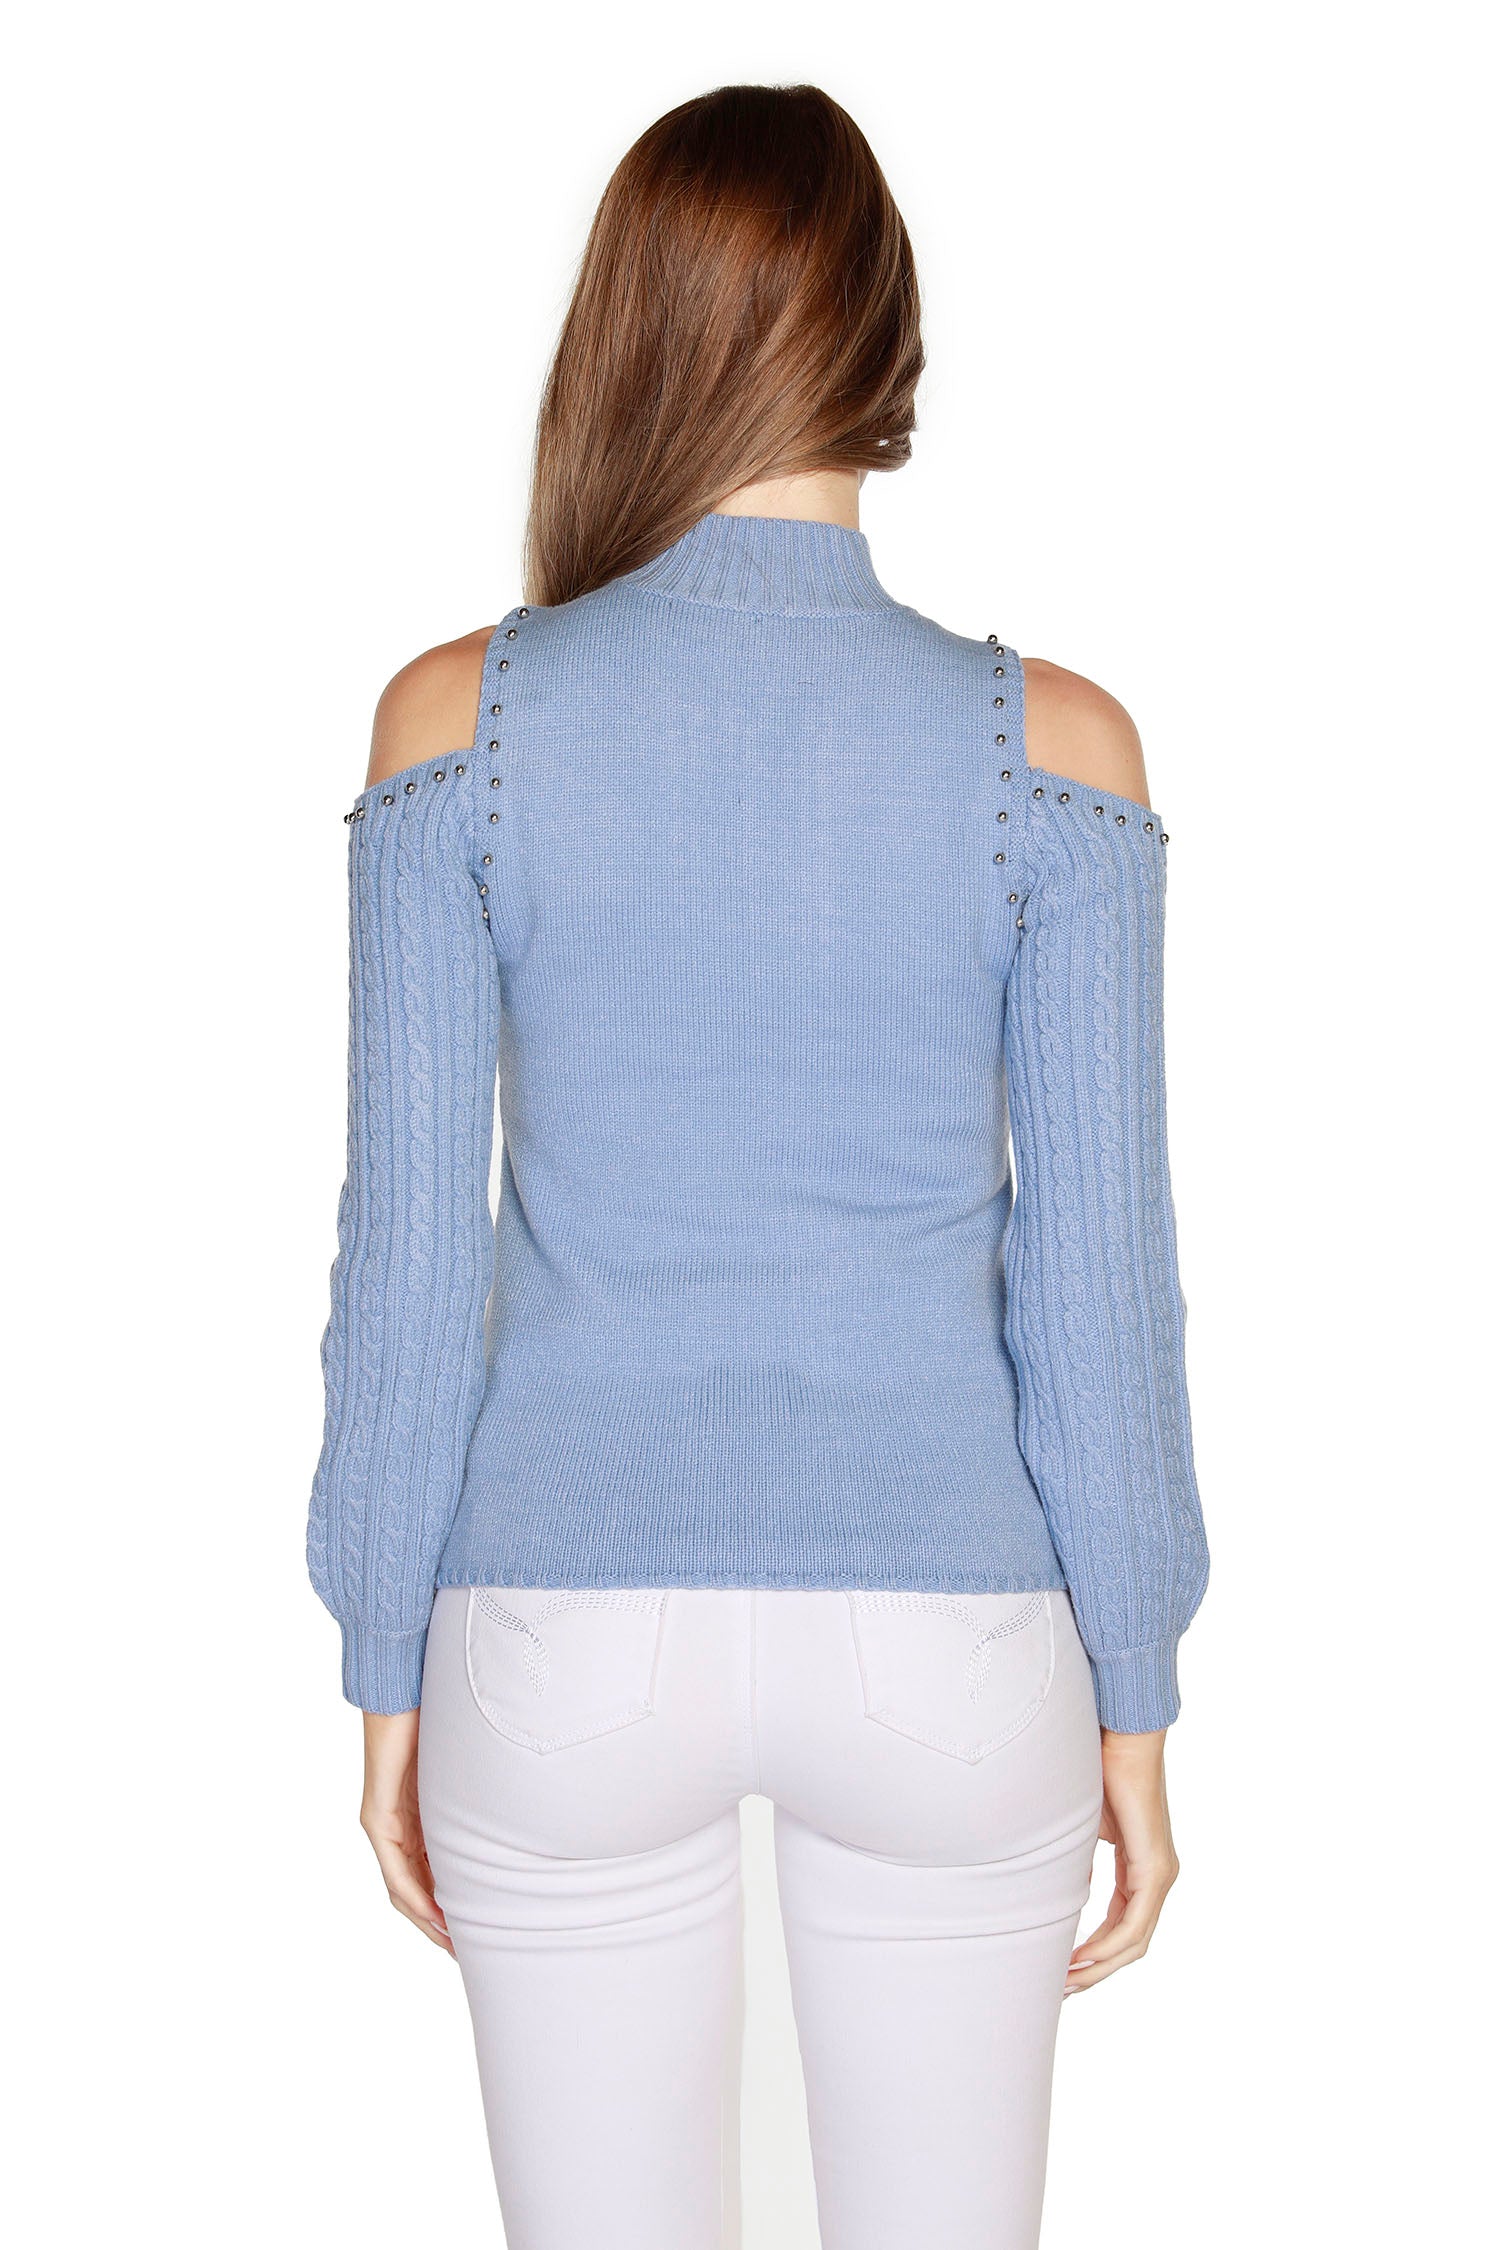 Women's Mock Neck Pullover Cold Shoulder Sweater - LAST CALL